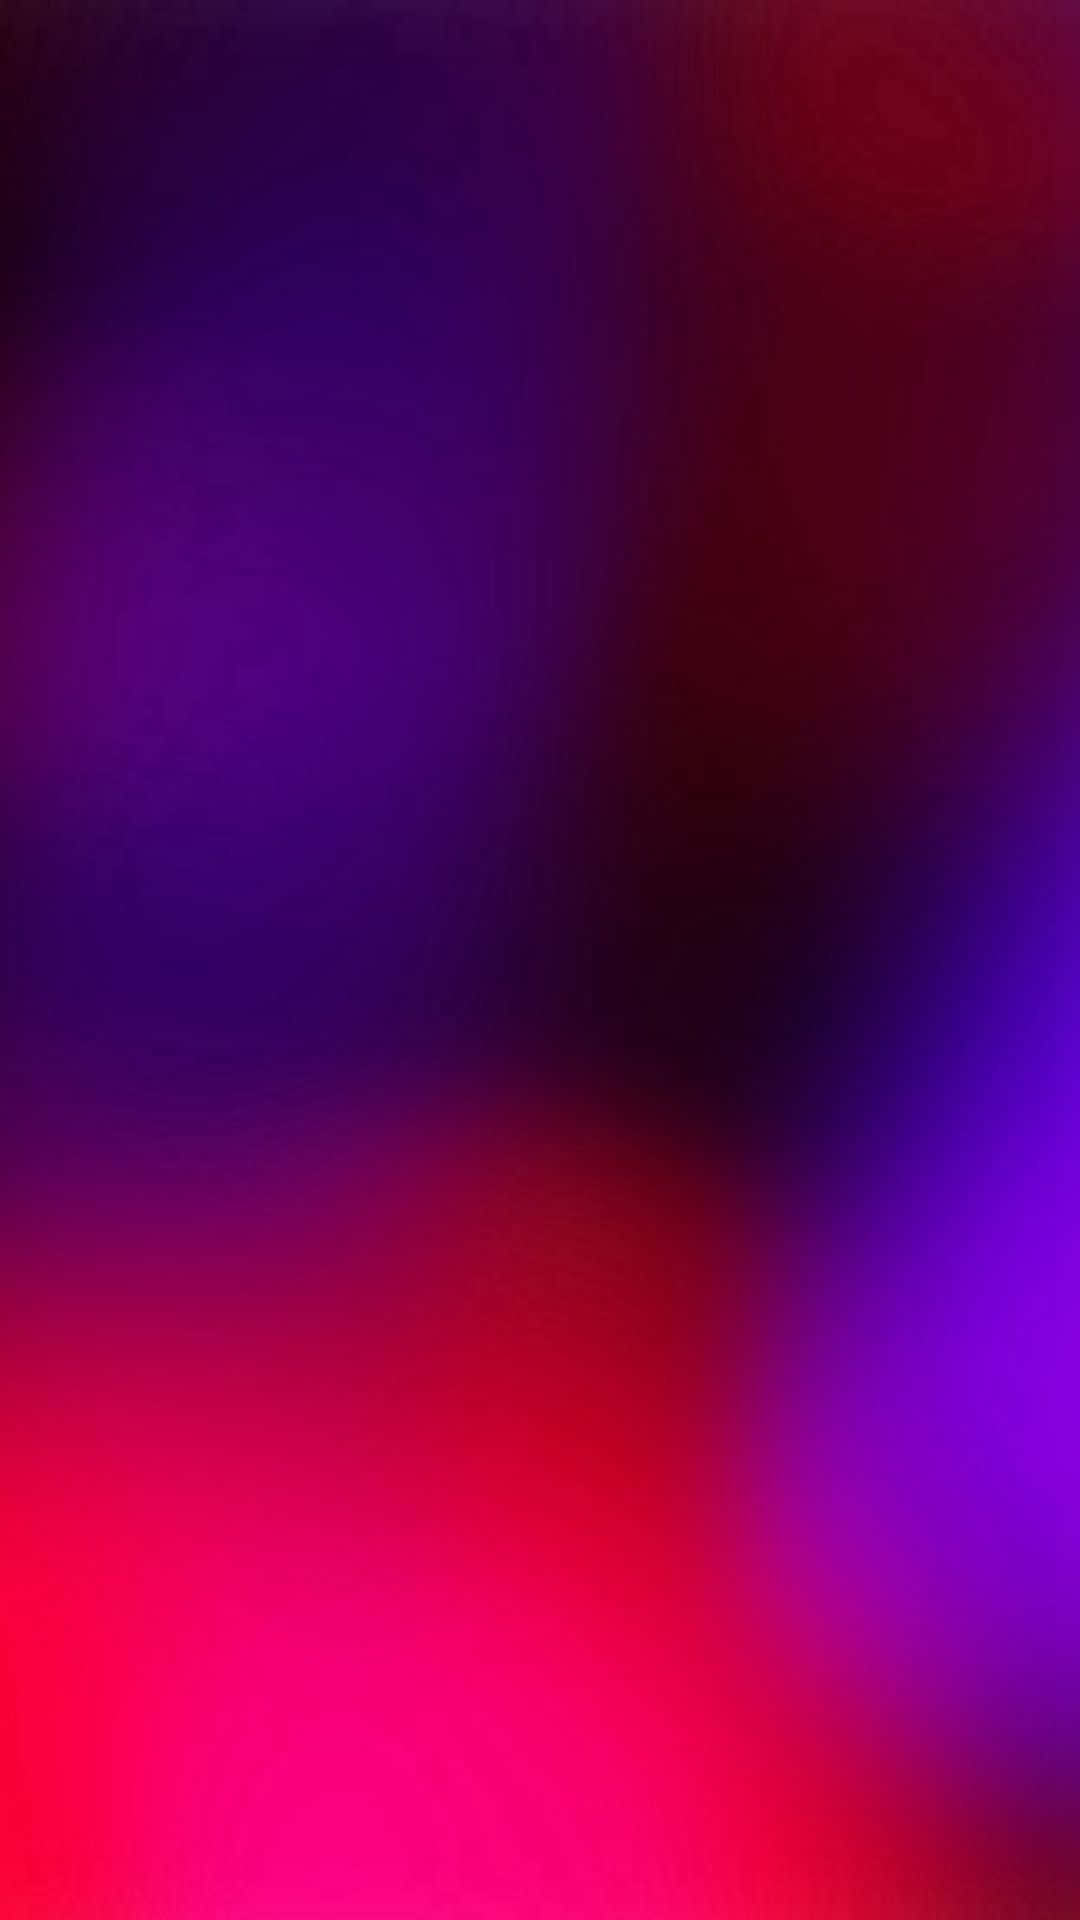 Blurred Red And Purple Background